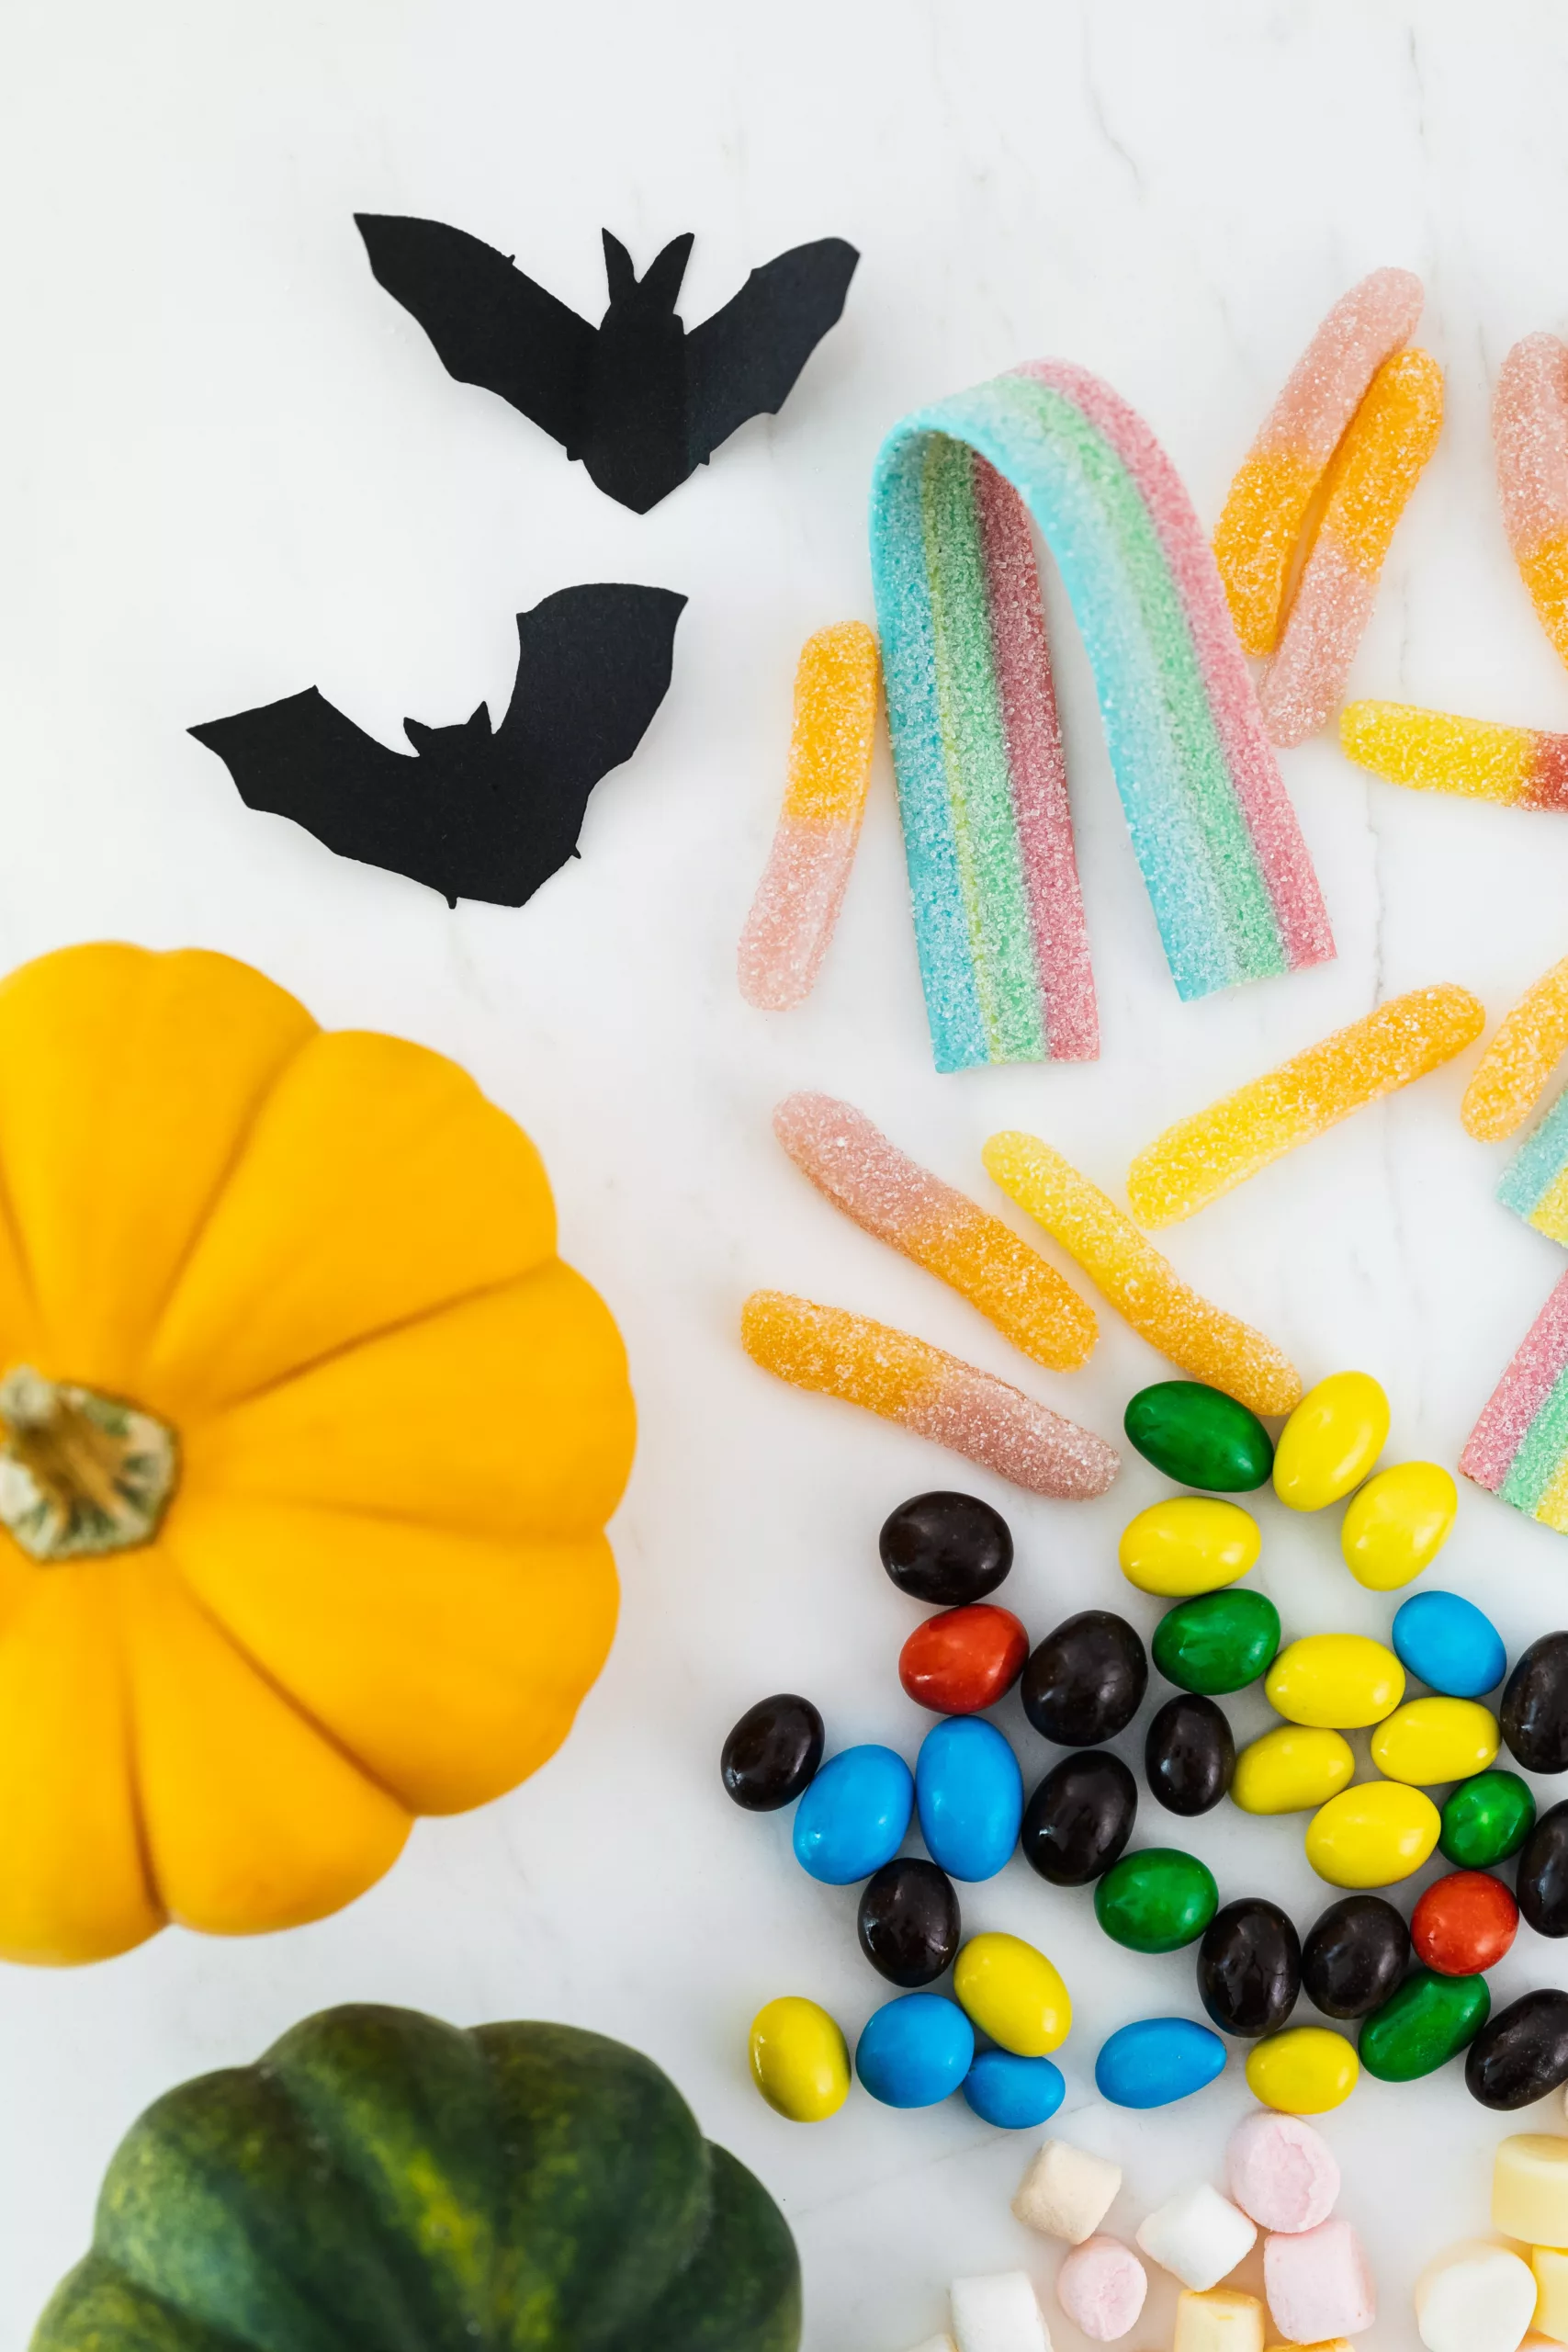 Vegan Halloween Candy: A Guilt-Free Treat for All Ghouls!